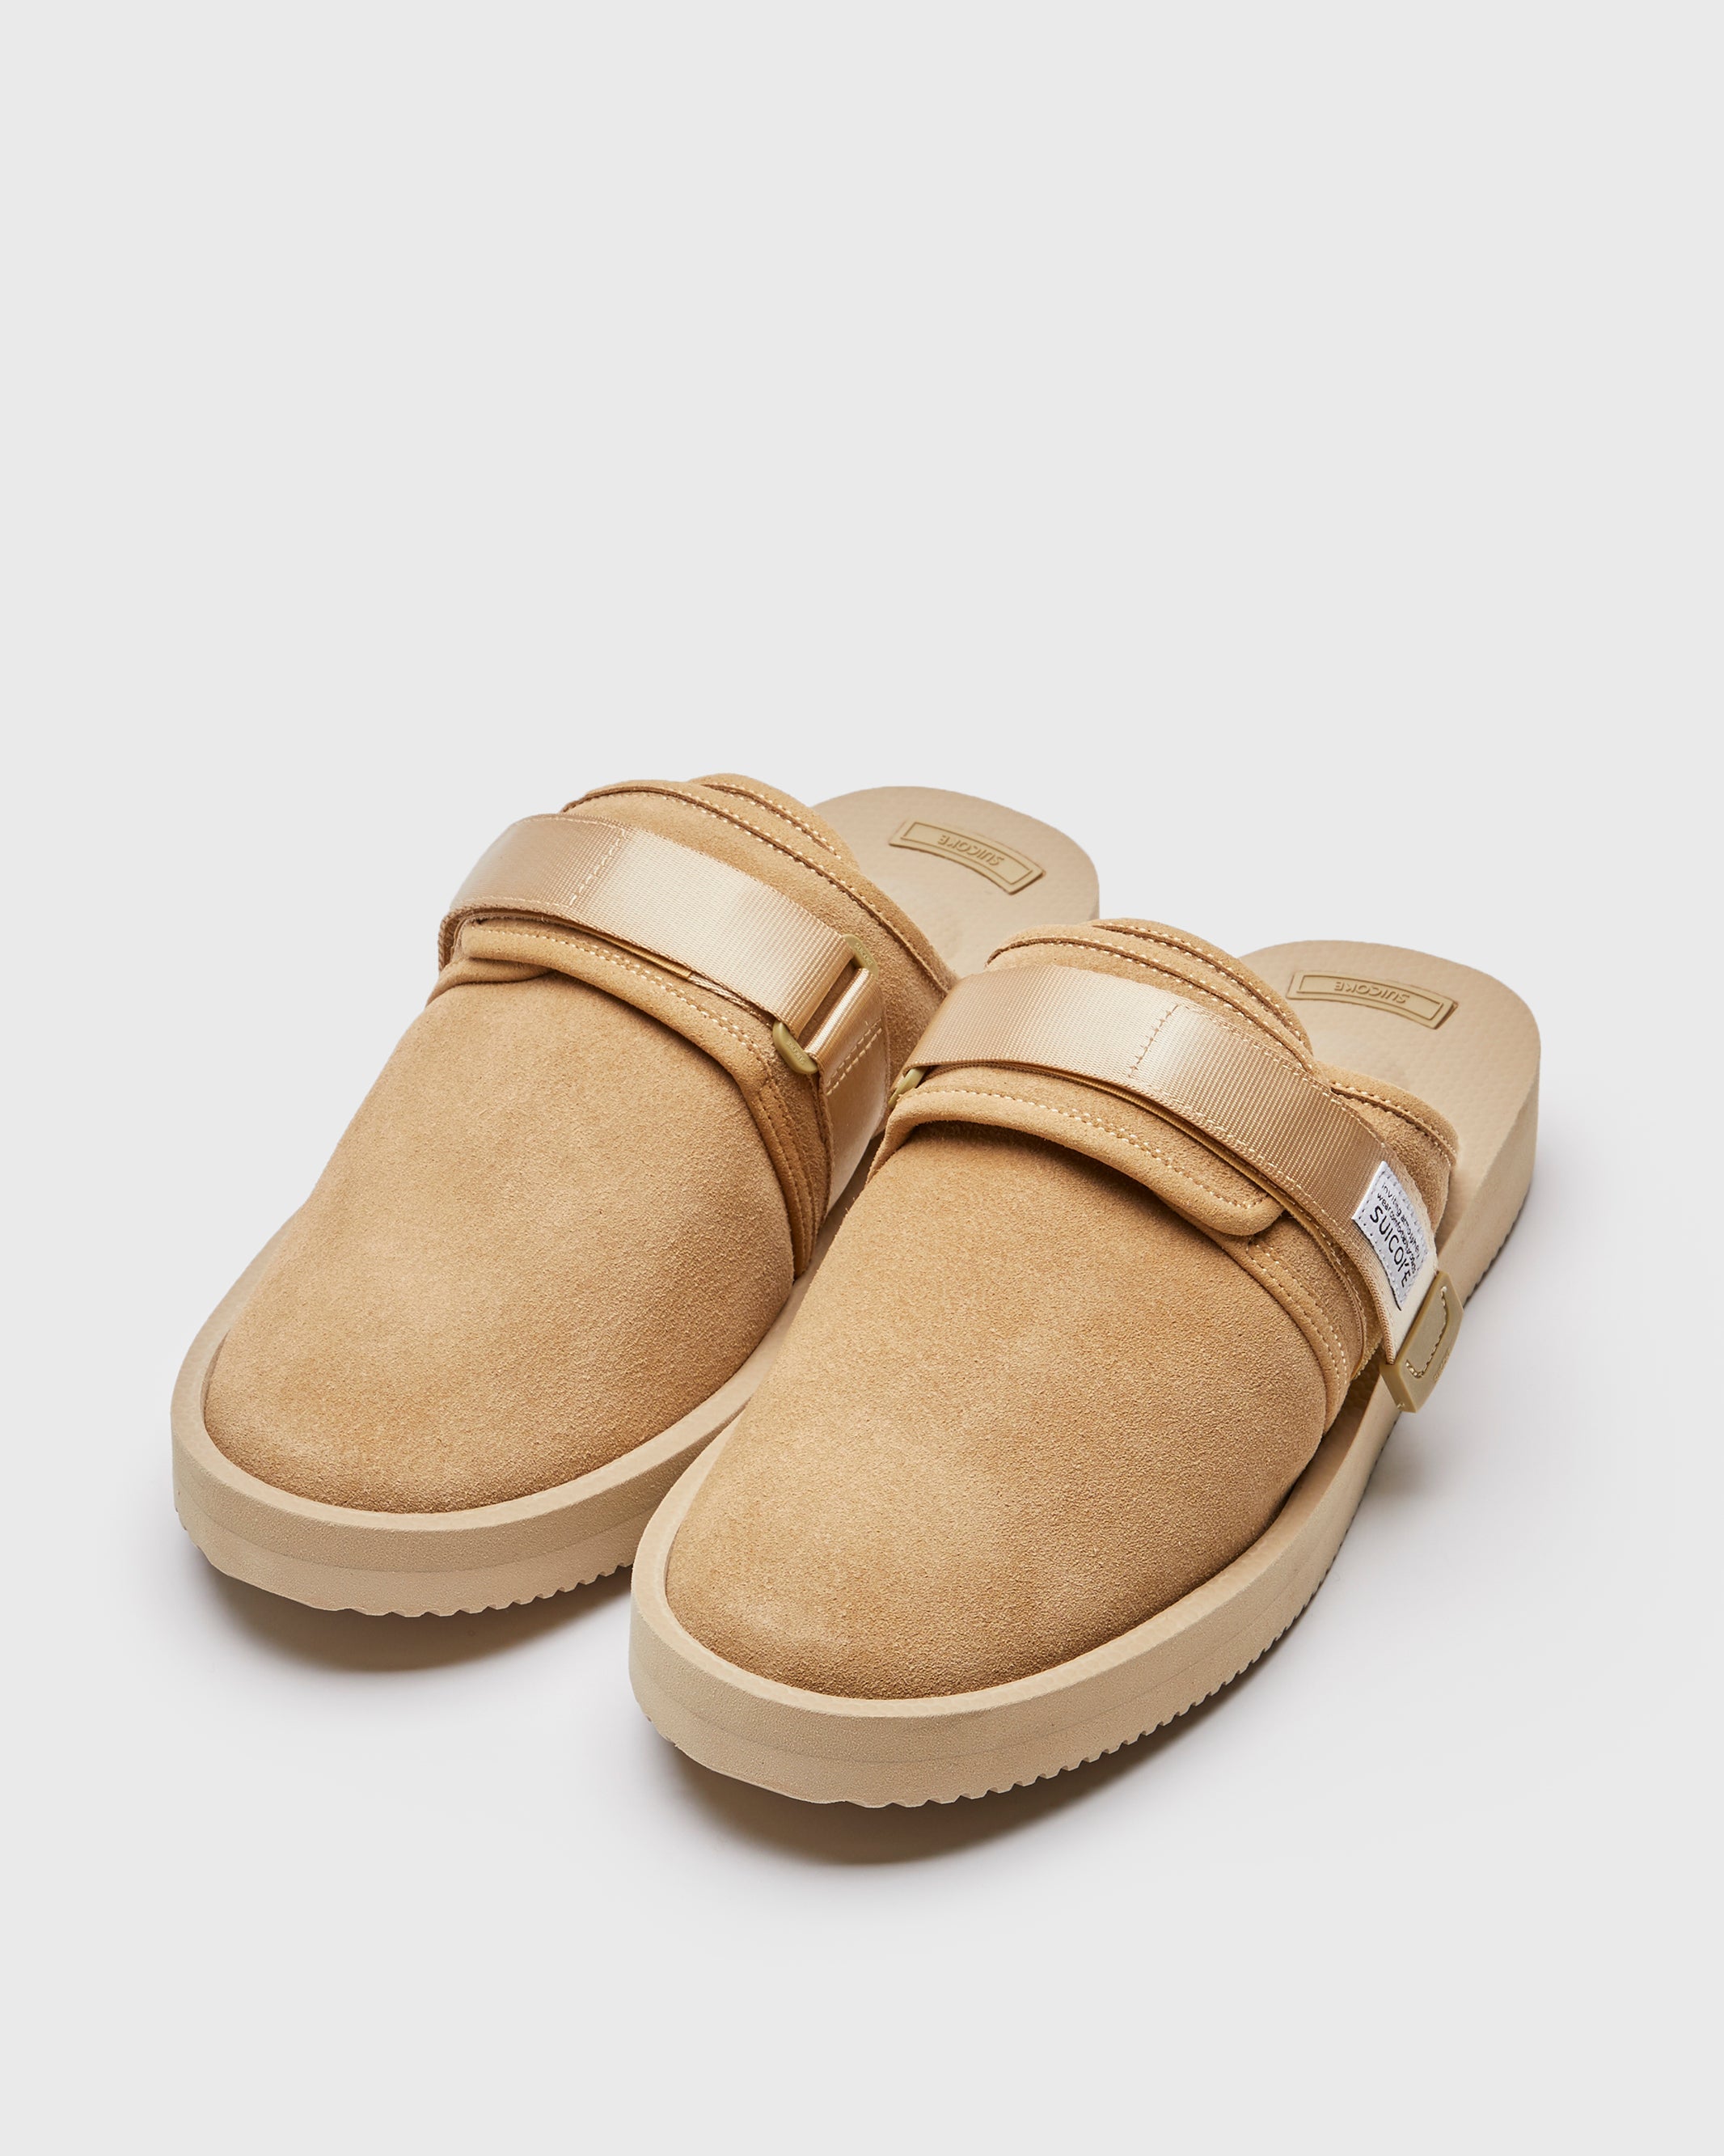 SUICOKE ZAVO-VS in Beige OG-072VS | Shop from eightywingold an official brand partner for SUICOKE Canada and US.